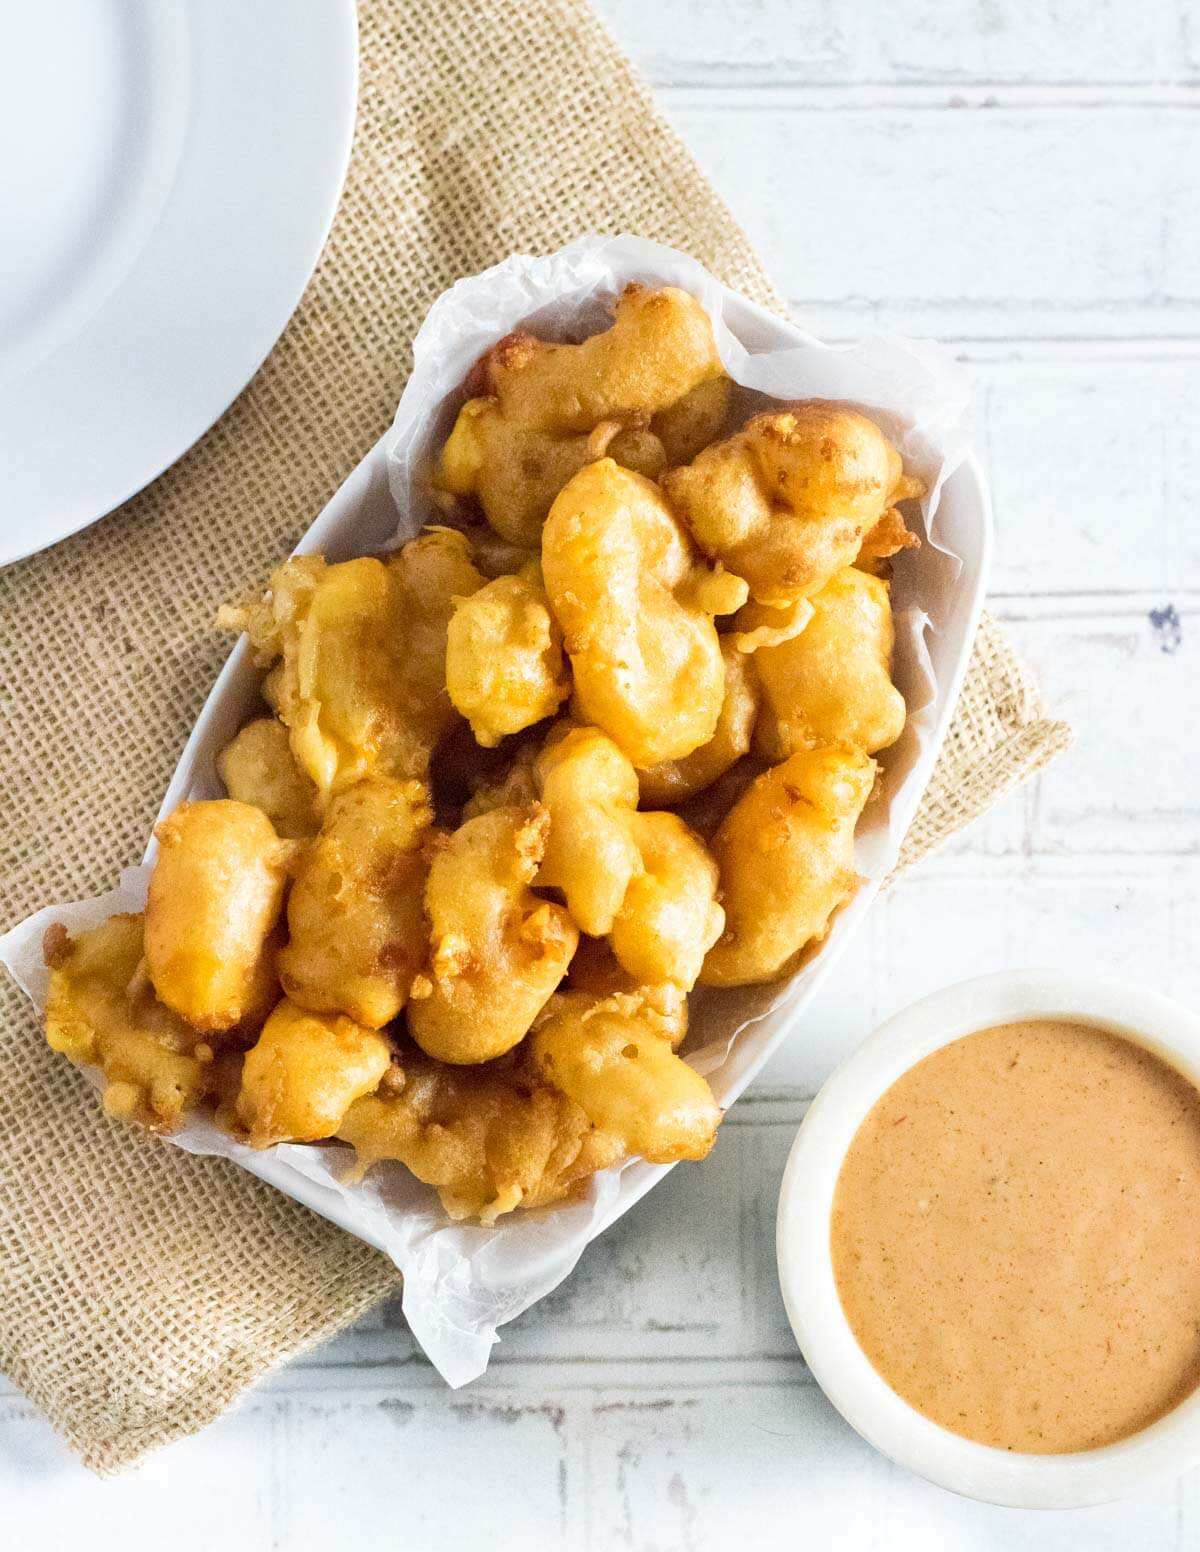 Fried cheese curds with dipping sauce.